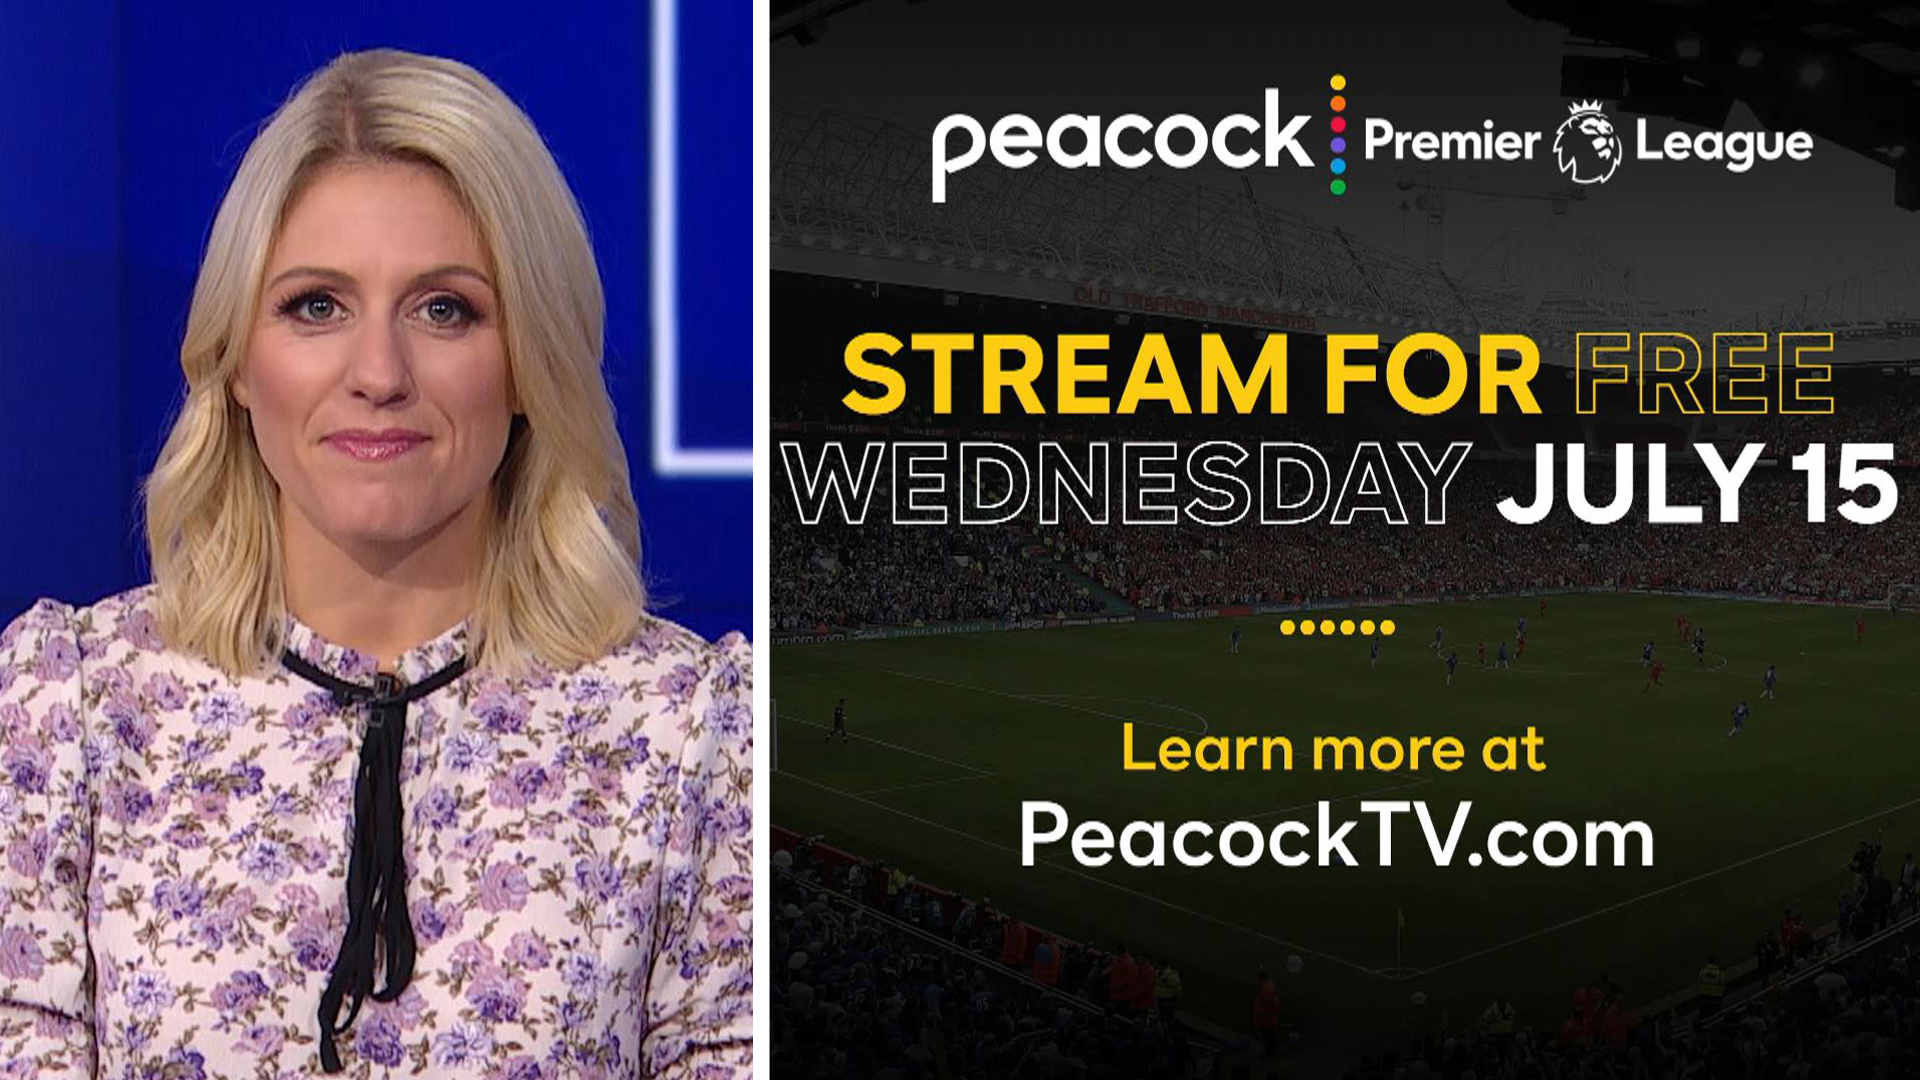 NBCUniversal makes Premier League free to celebrate Peacock launch